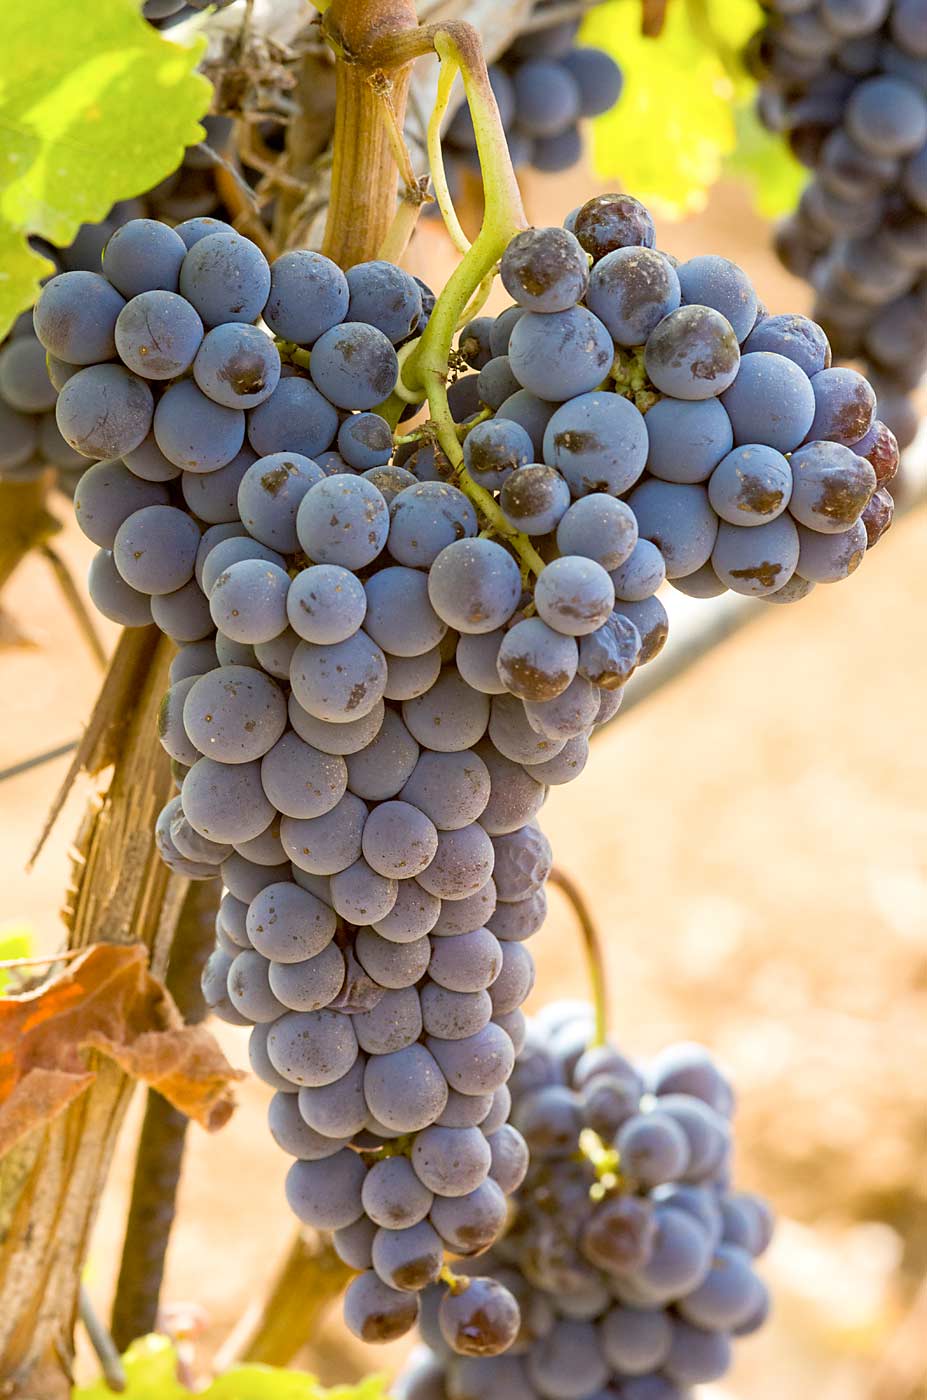 One of the grape varieties grown at Santa Tresa is Frappato. The grapes are crushed lightly to produce a wine with a maximum 15 percent of alcohol and a bouquet Girelli described as “like wild strawberries.” (Courtesy Santa Tresa vineyard)